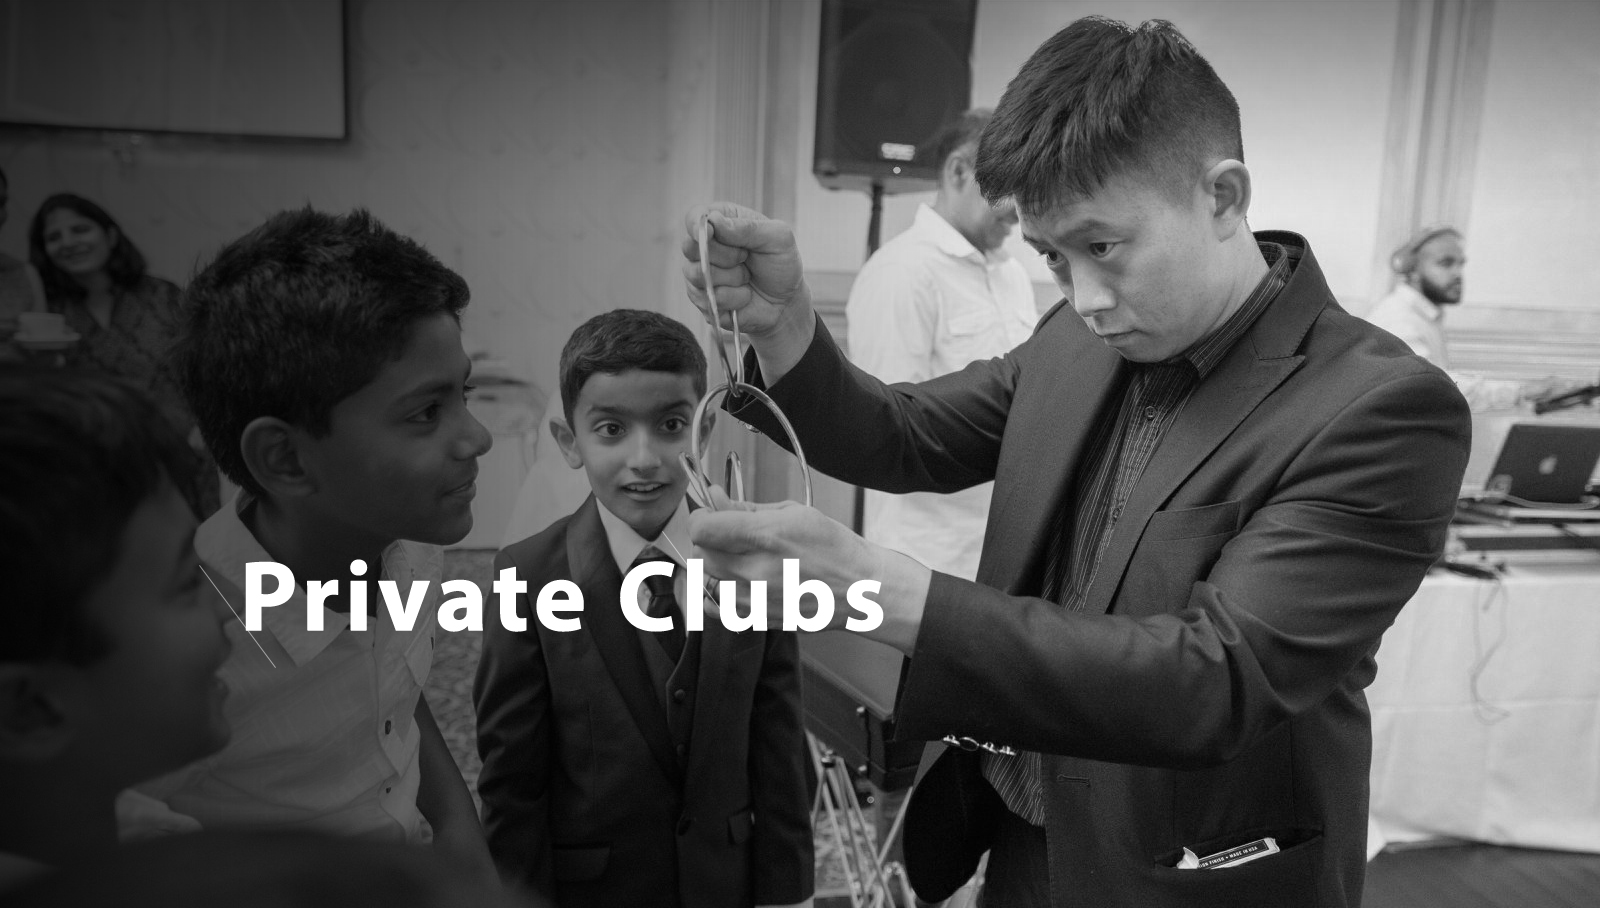 Performing magic at private clubs